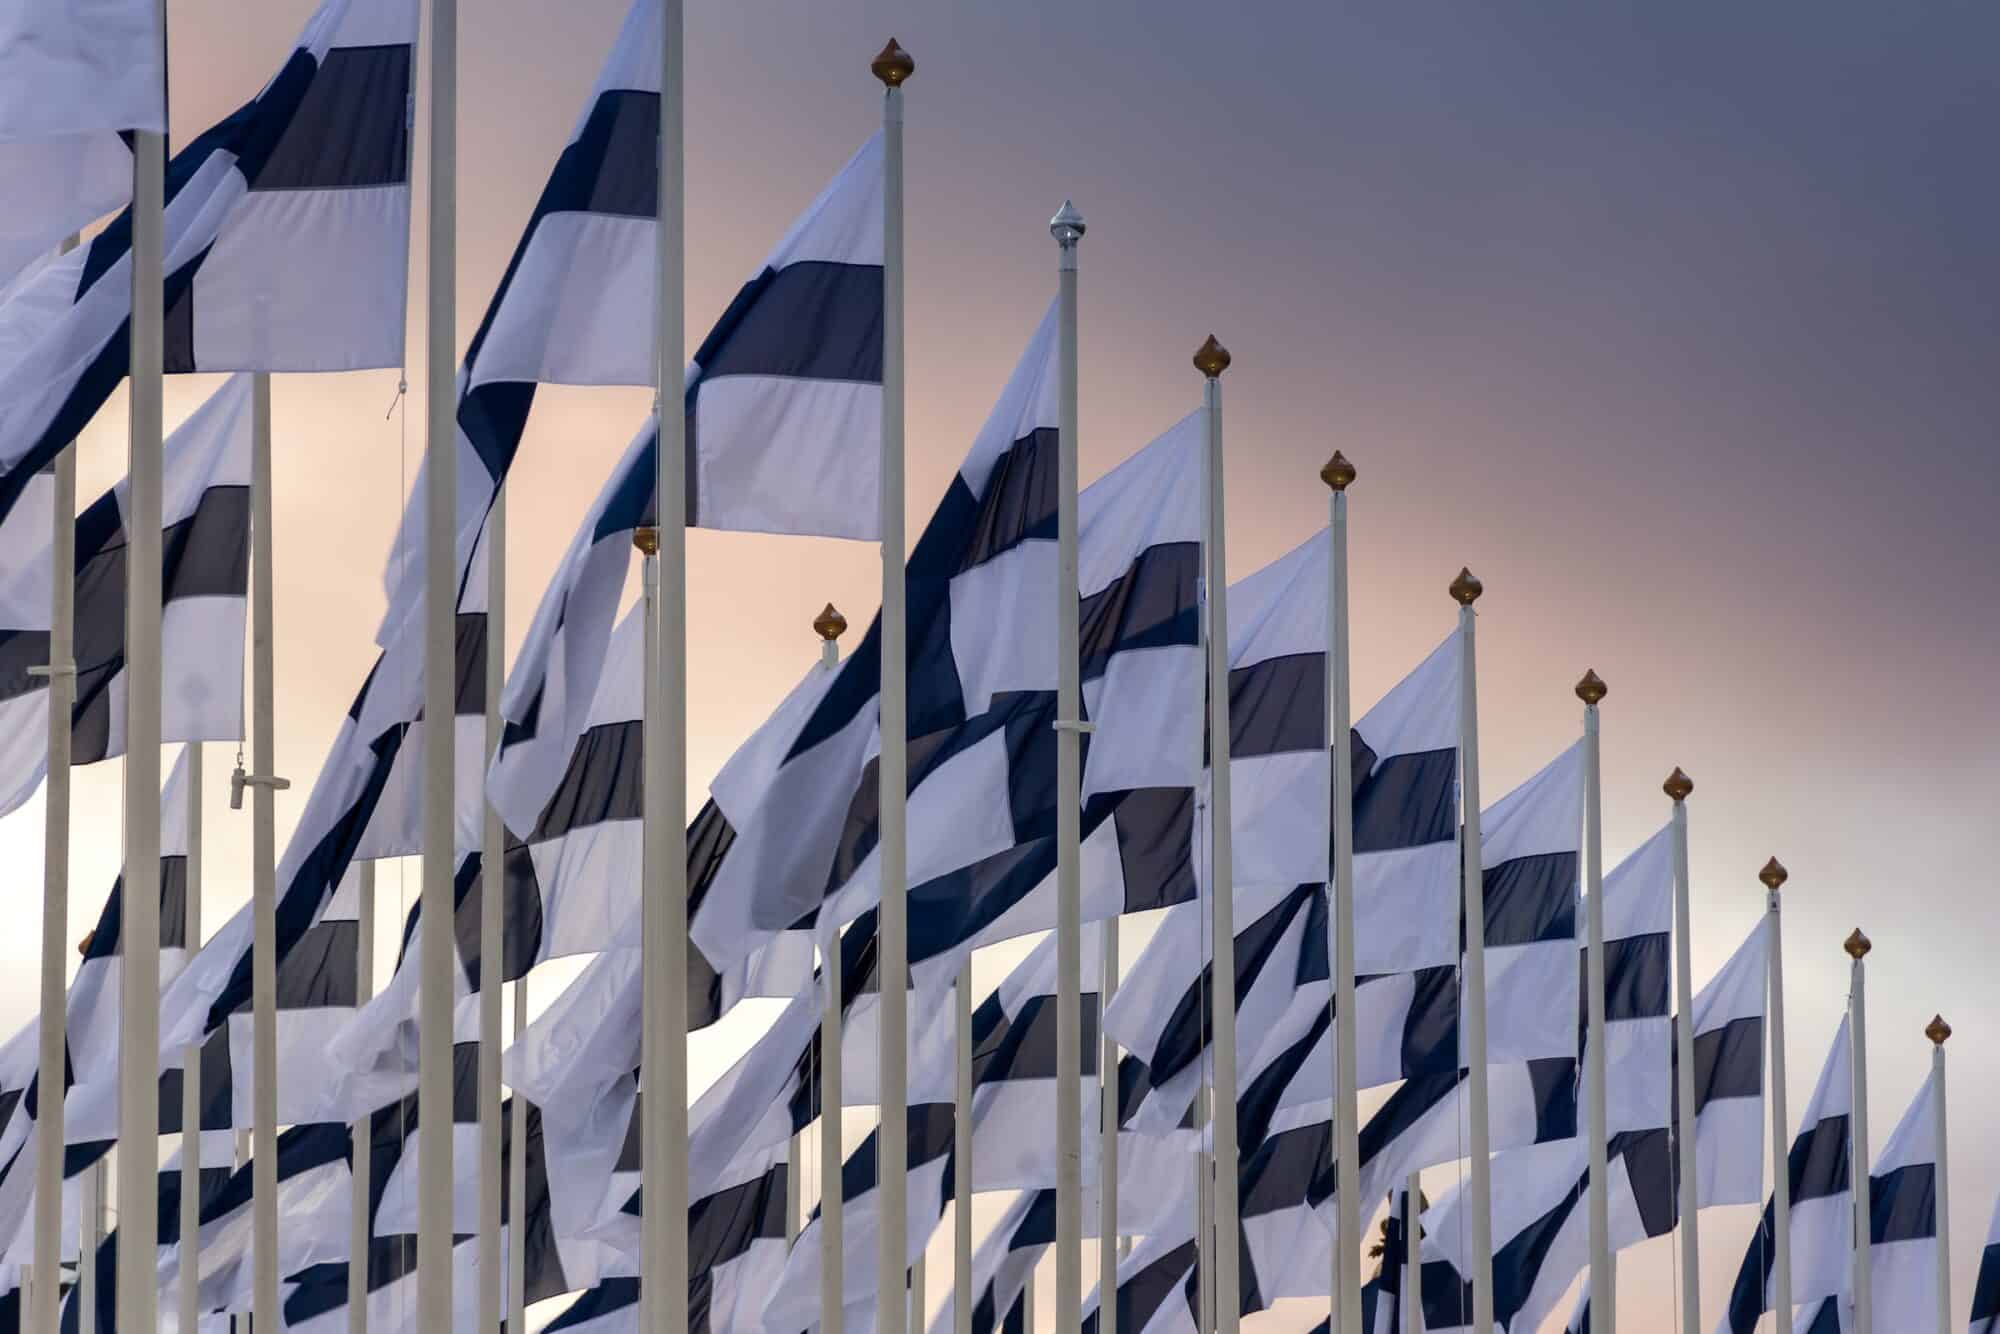 Rows of of Finnish flags.